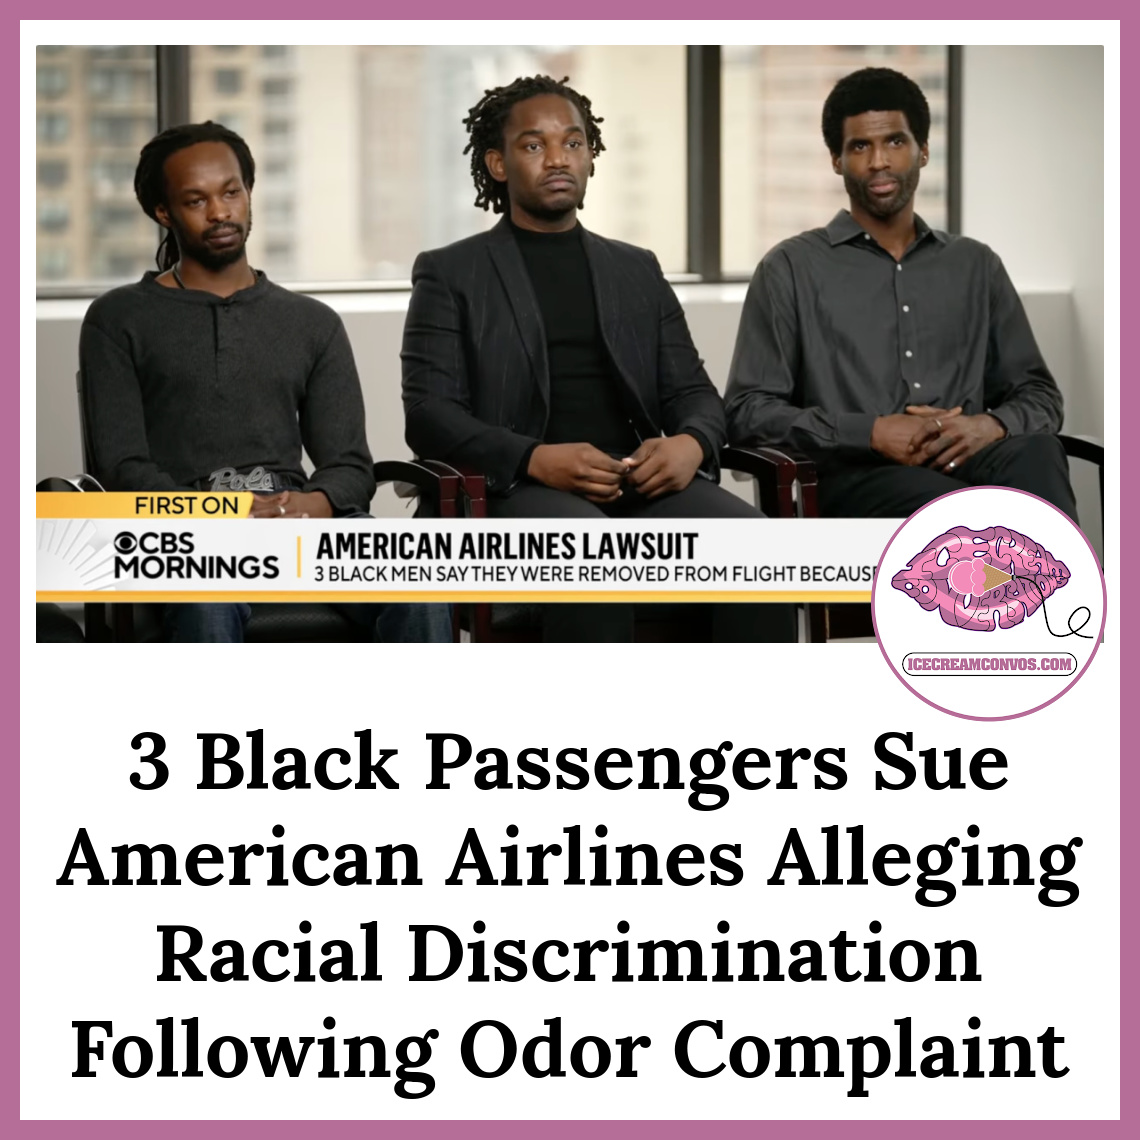 3 Black men are suing American Airlines, alleging racial discrimination after 8 Black men were booted from the same flight over body odor.⚖️✈️🍦 bit.ly/3KnKTgE

#AmericanAirlines #Lawsuits #RacialDiscrimination #IceCreamConvos